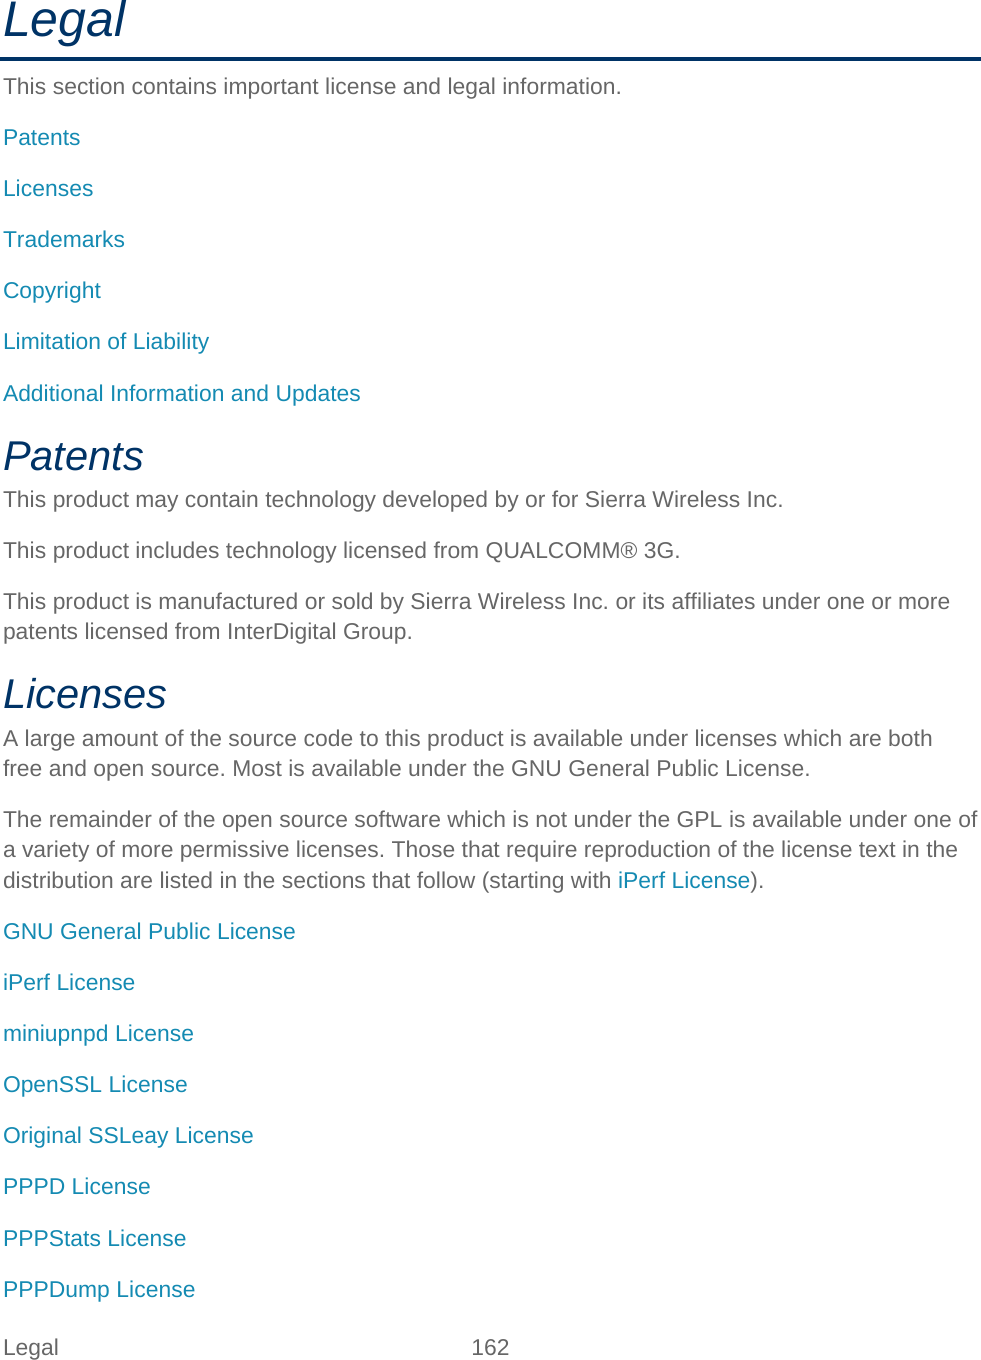 Legal 162   Legal This section contains important license and legal information. Patents Licenses Trademarks Copyright Limitation of Liability Additional Information and Updates Patents This product may contain technology developed by or for Sierra Wireless Inc. This product includes technology licensed from QUALCOMM® 3G. This product is manufactured or sold by Sierra Wireless Inc. or its affiliates under one or more patents licensed from InterDigital Group. Licenses A large amount of the source code to this product is available under licenses which are both free and open source. Most is available under the GNU General Public License. The remainder of the open source software which is not under the GPL is available under one of a variety of more permissive licenses. Those that require reproduction of the license text in the distribution are listed in the sections that follow (starting with iPerf License). GNU General Public License iPerf License miniupnpd License OpenSSL License Original SSLeay License PPPD License PPPStats License PPPDump License 